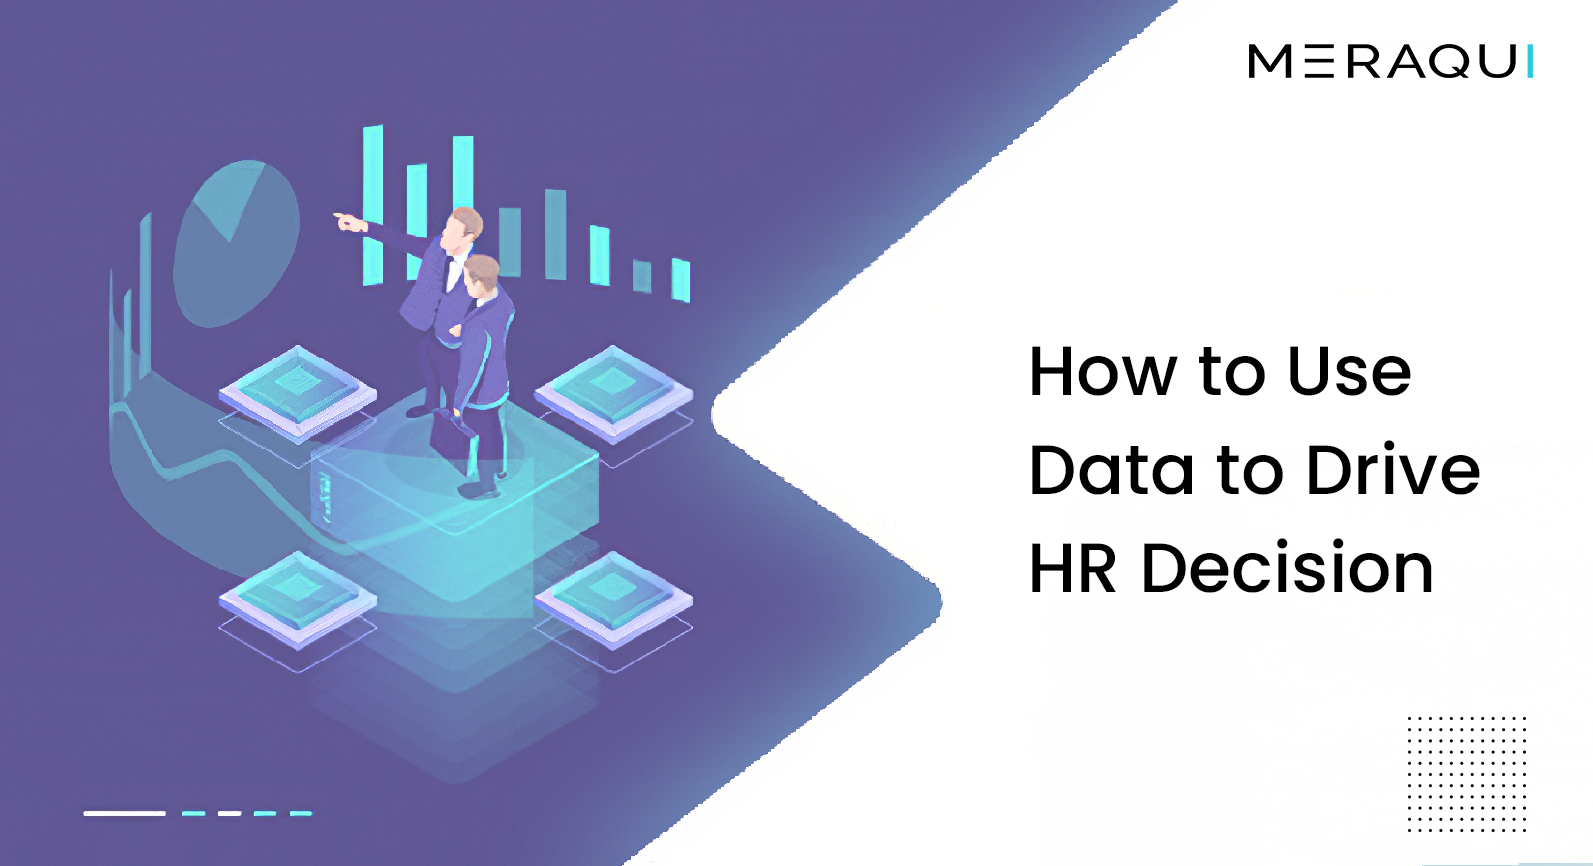 How to Use Data to Drive HR Decision